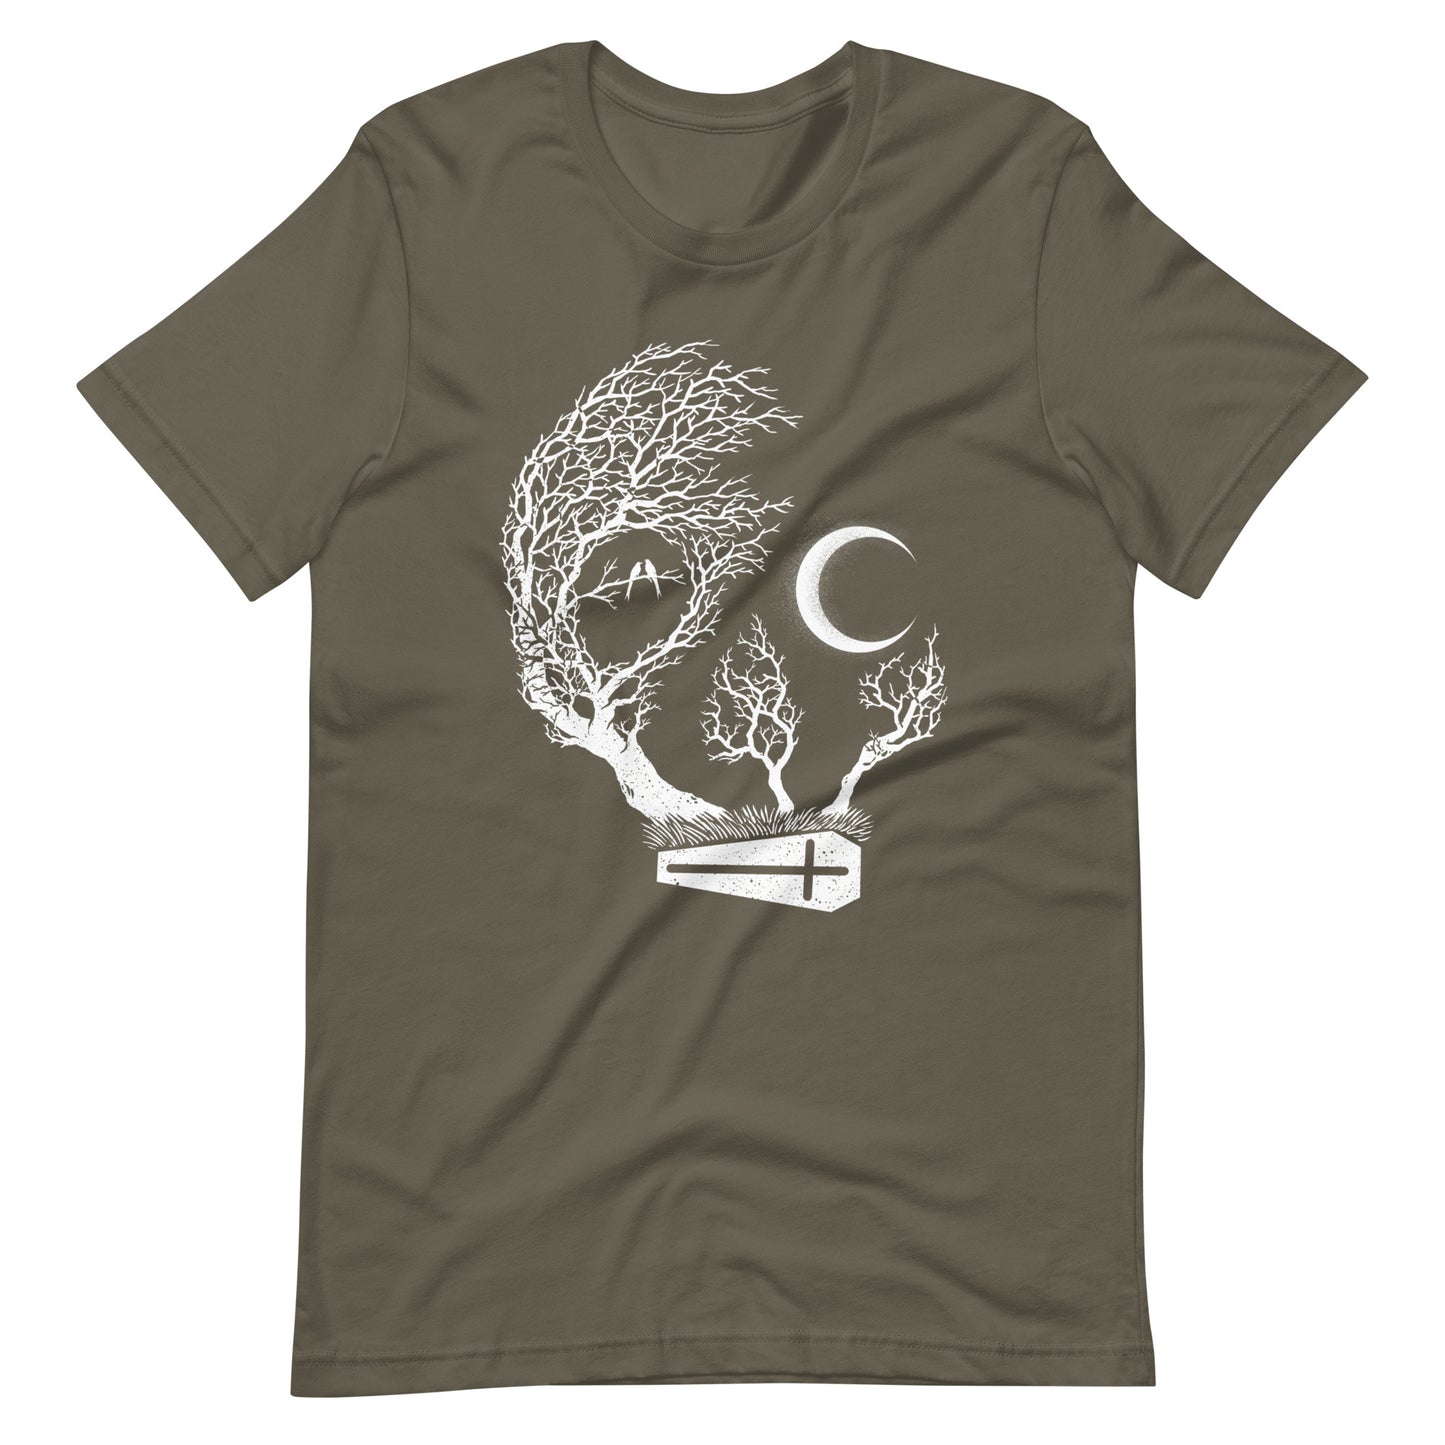 Friday Night Death - Men's t-shirt - Army Front